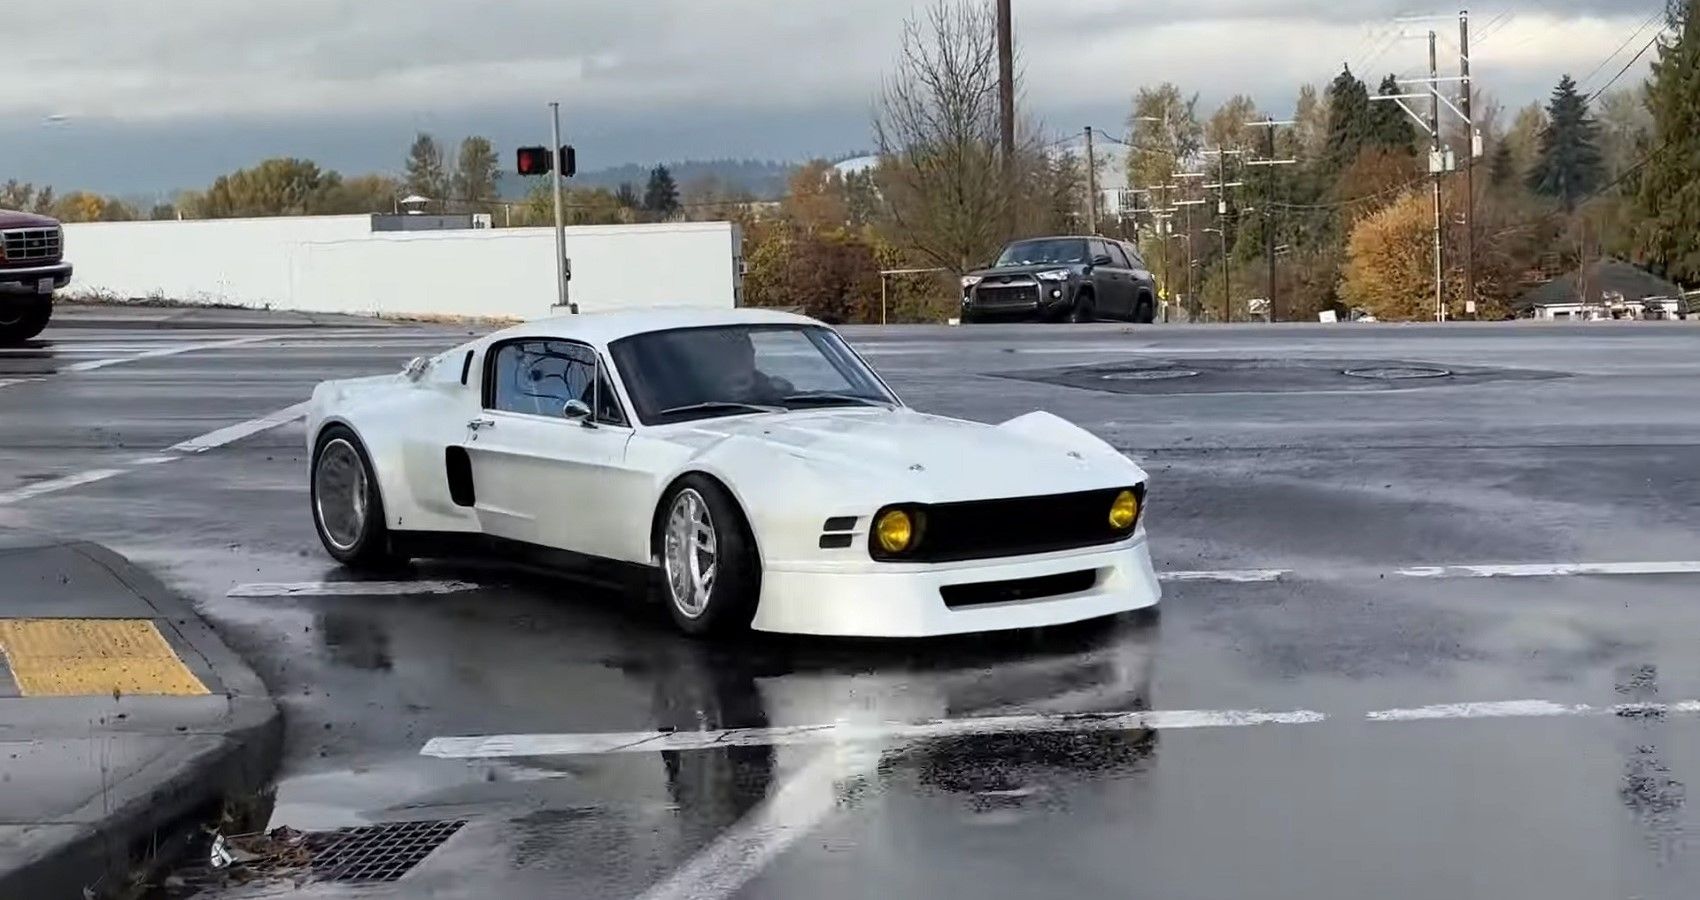 A Wide-Body Mid-Engine 1967 Ford Mustang Fastback Hits The Road For The First Time